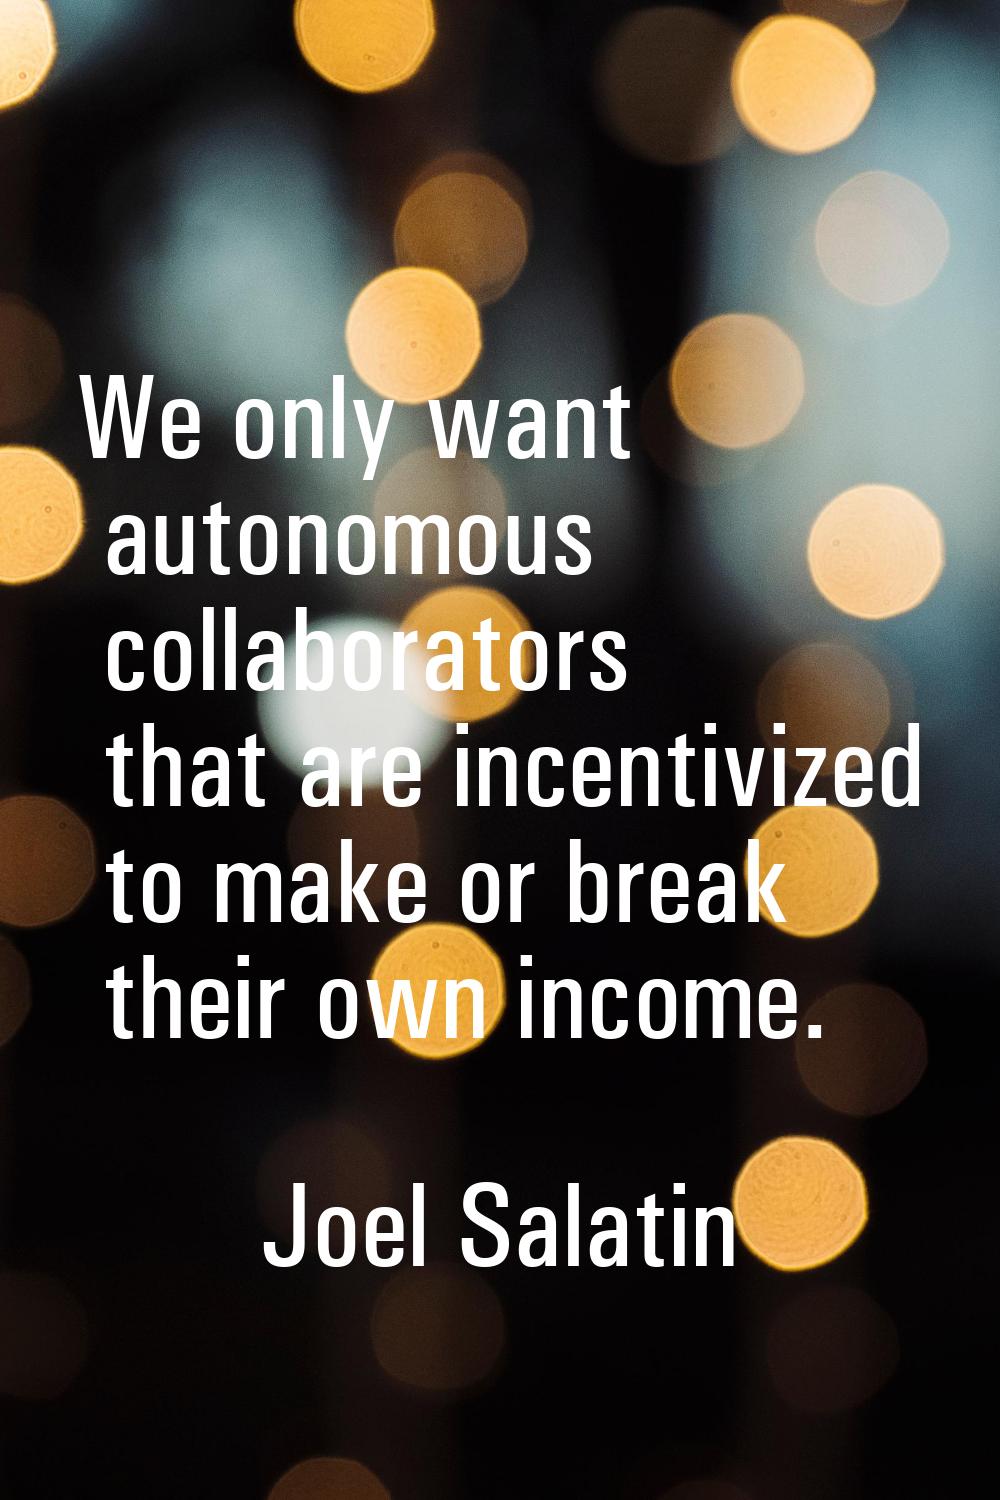 We only want autonomous collaborators that are incentivized to make or break their own income.